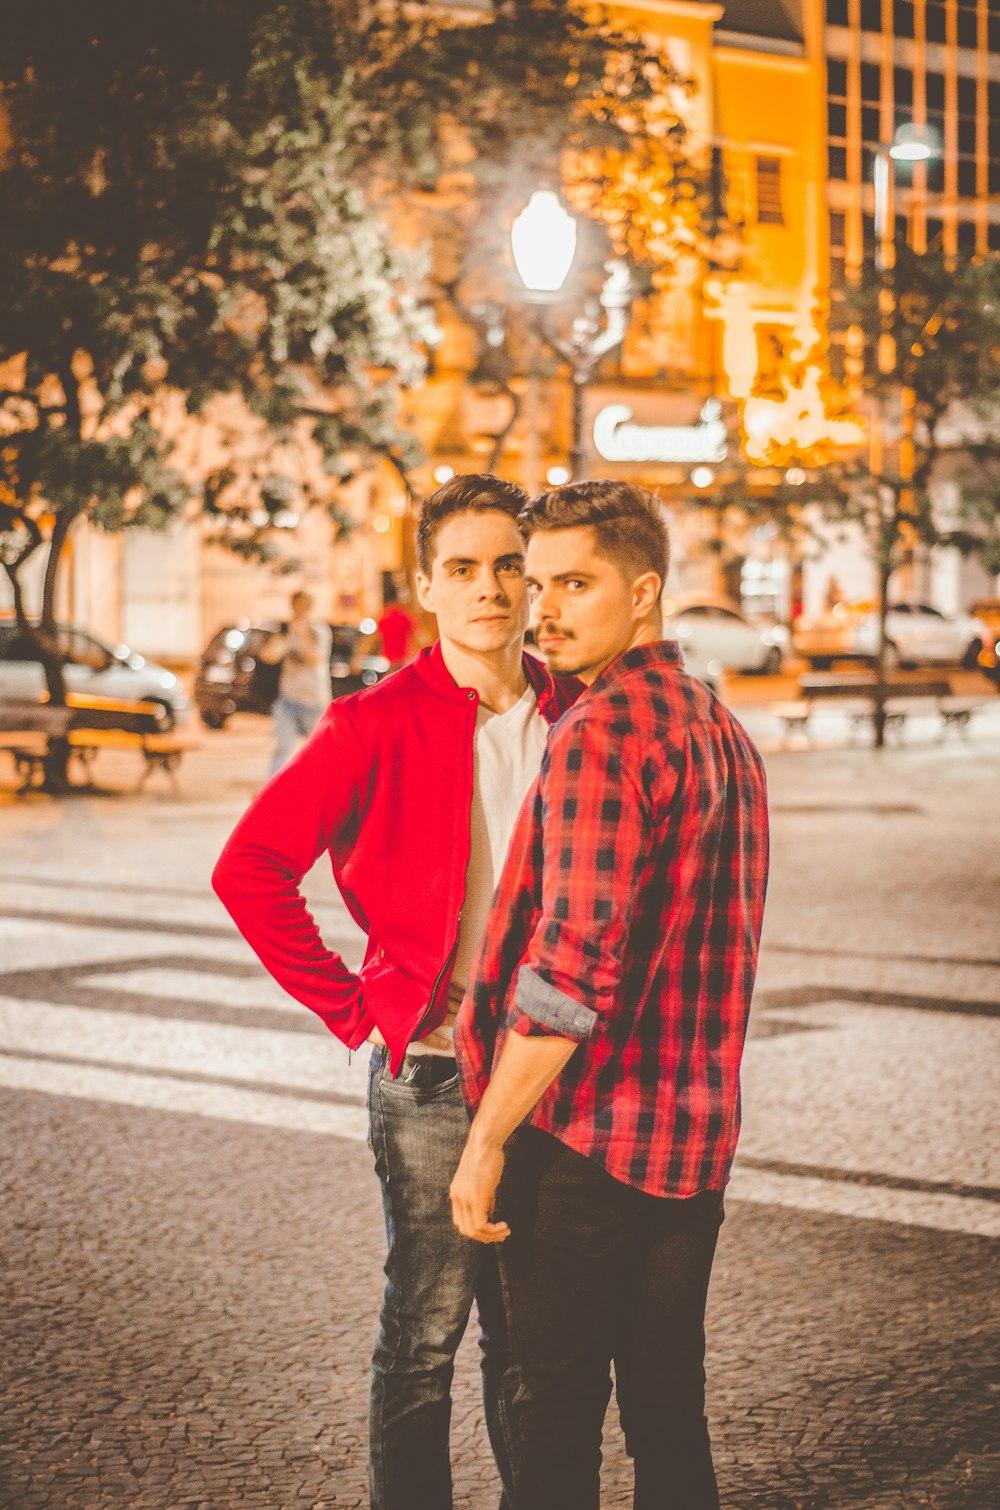 Two young men standing close together at night in a city square